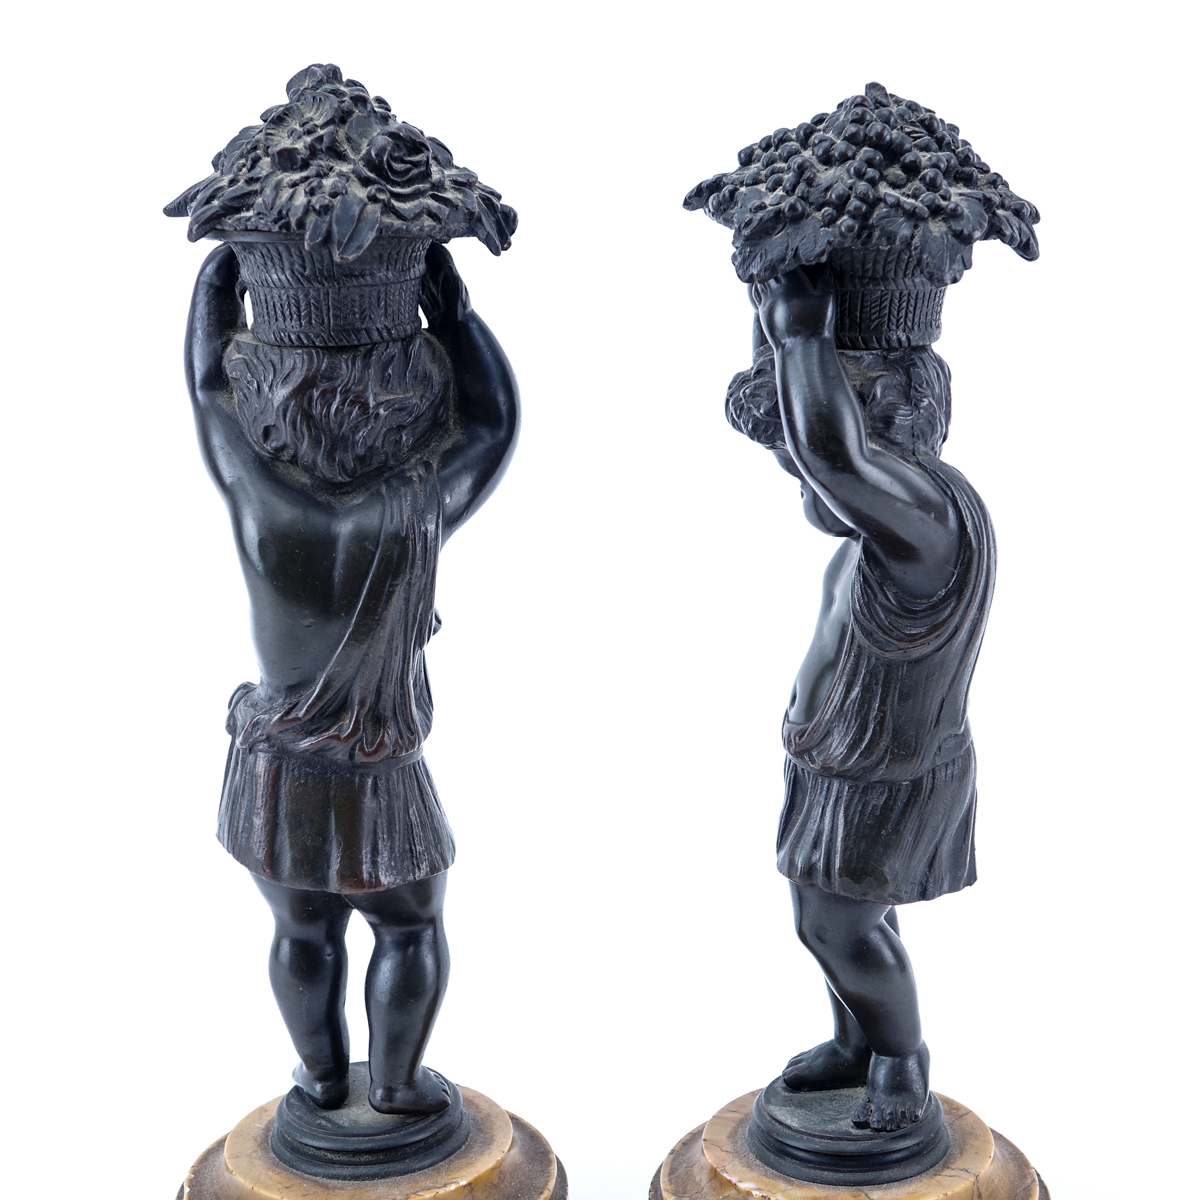 Pair of 19/20th Century Continental Bronze Putti Figures With Baskets on Sienna Marble Bases. Unsigned.